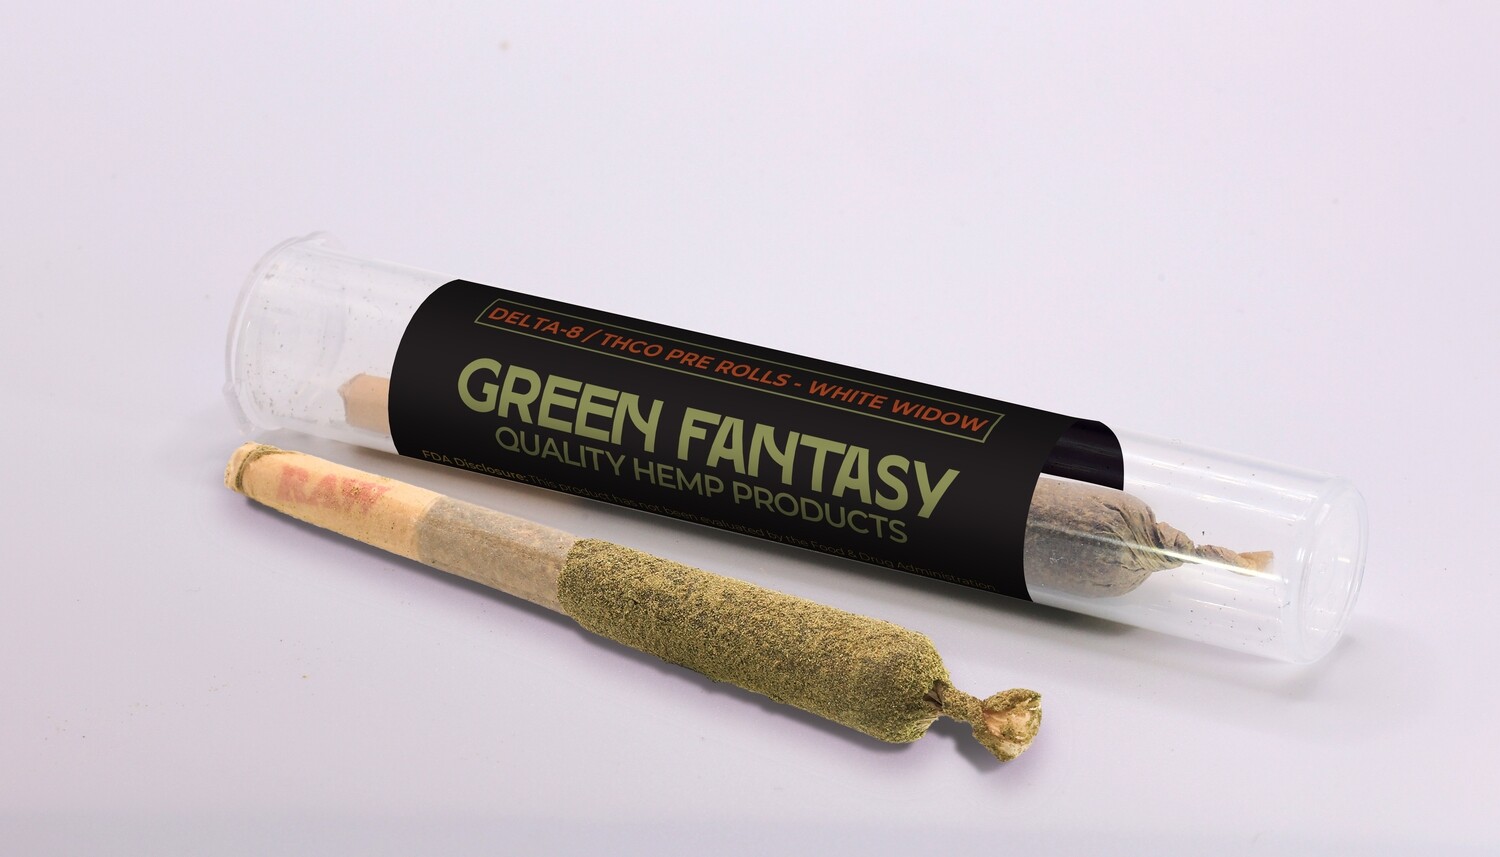 THCO Pre-Rolls White Widow
- From 2 PIECES